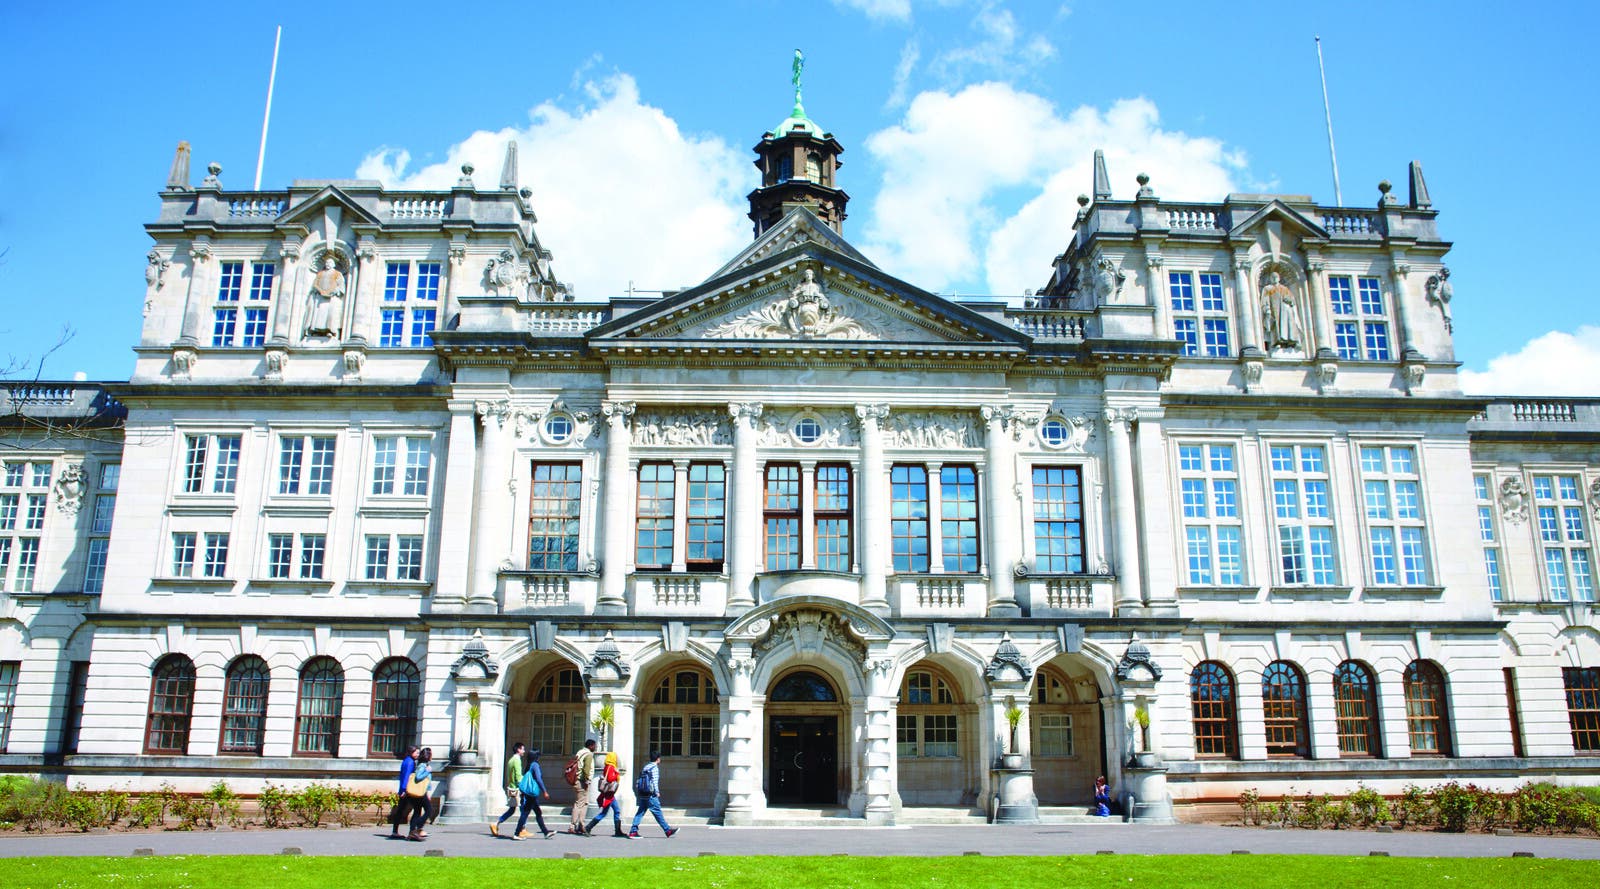 An ancient building on Cardiff University's campus